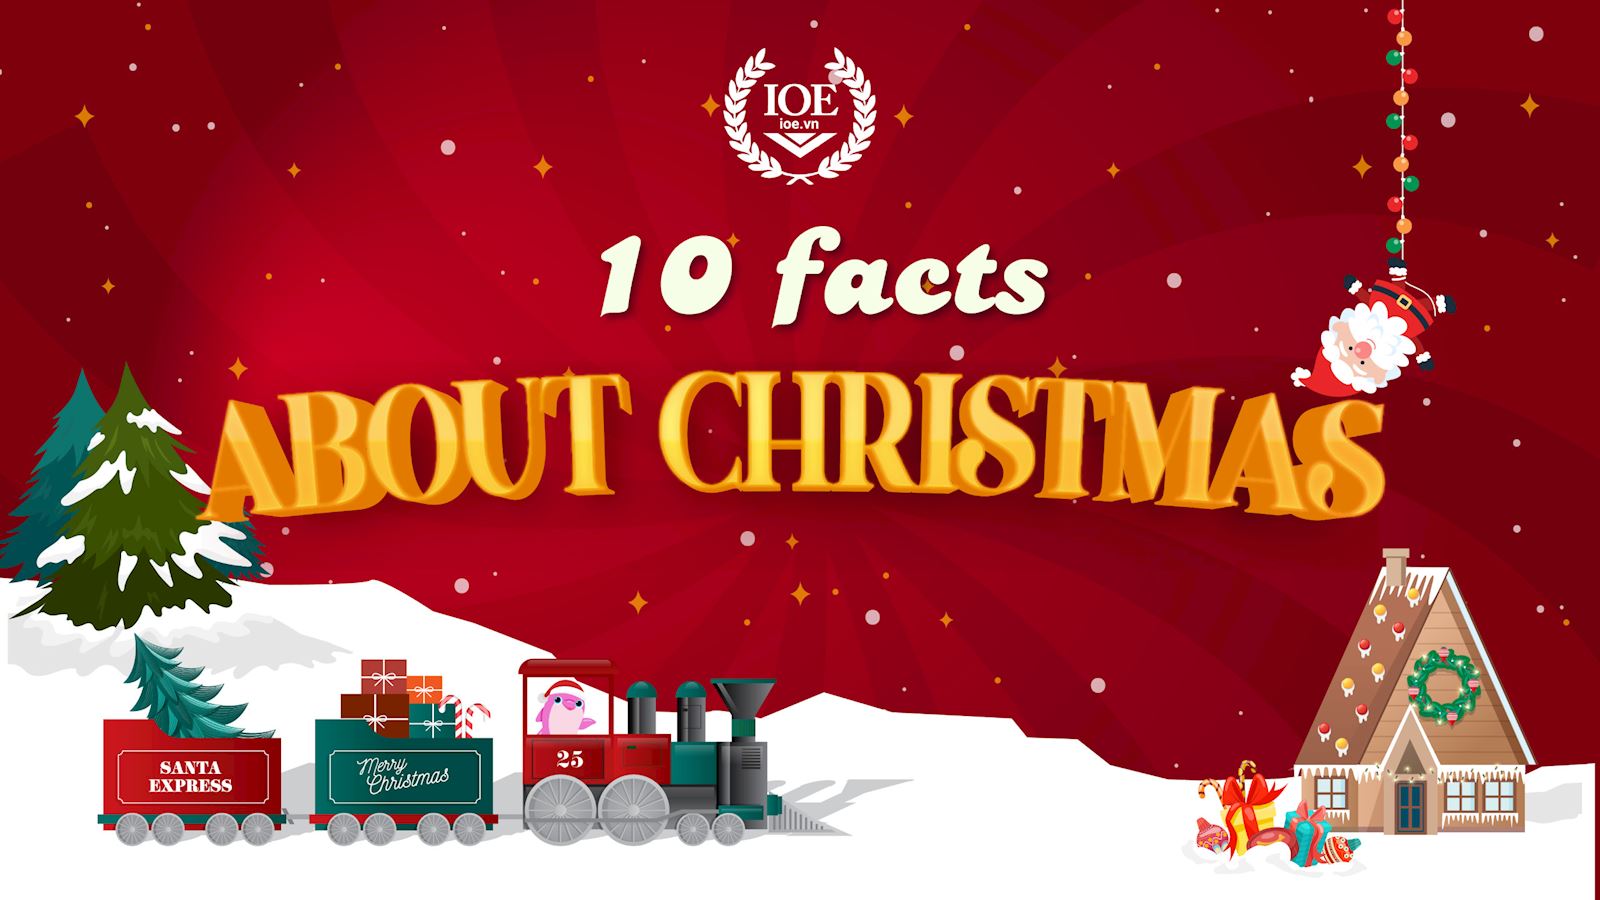 10 facts about Christmas